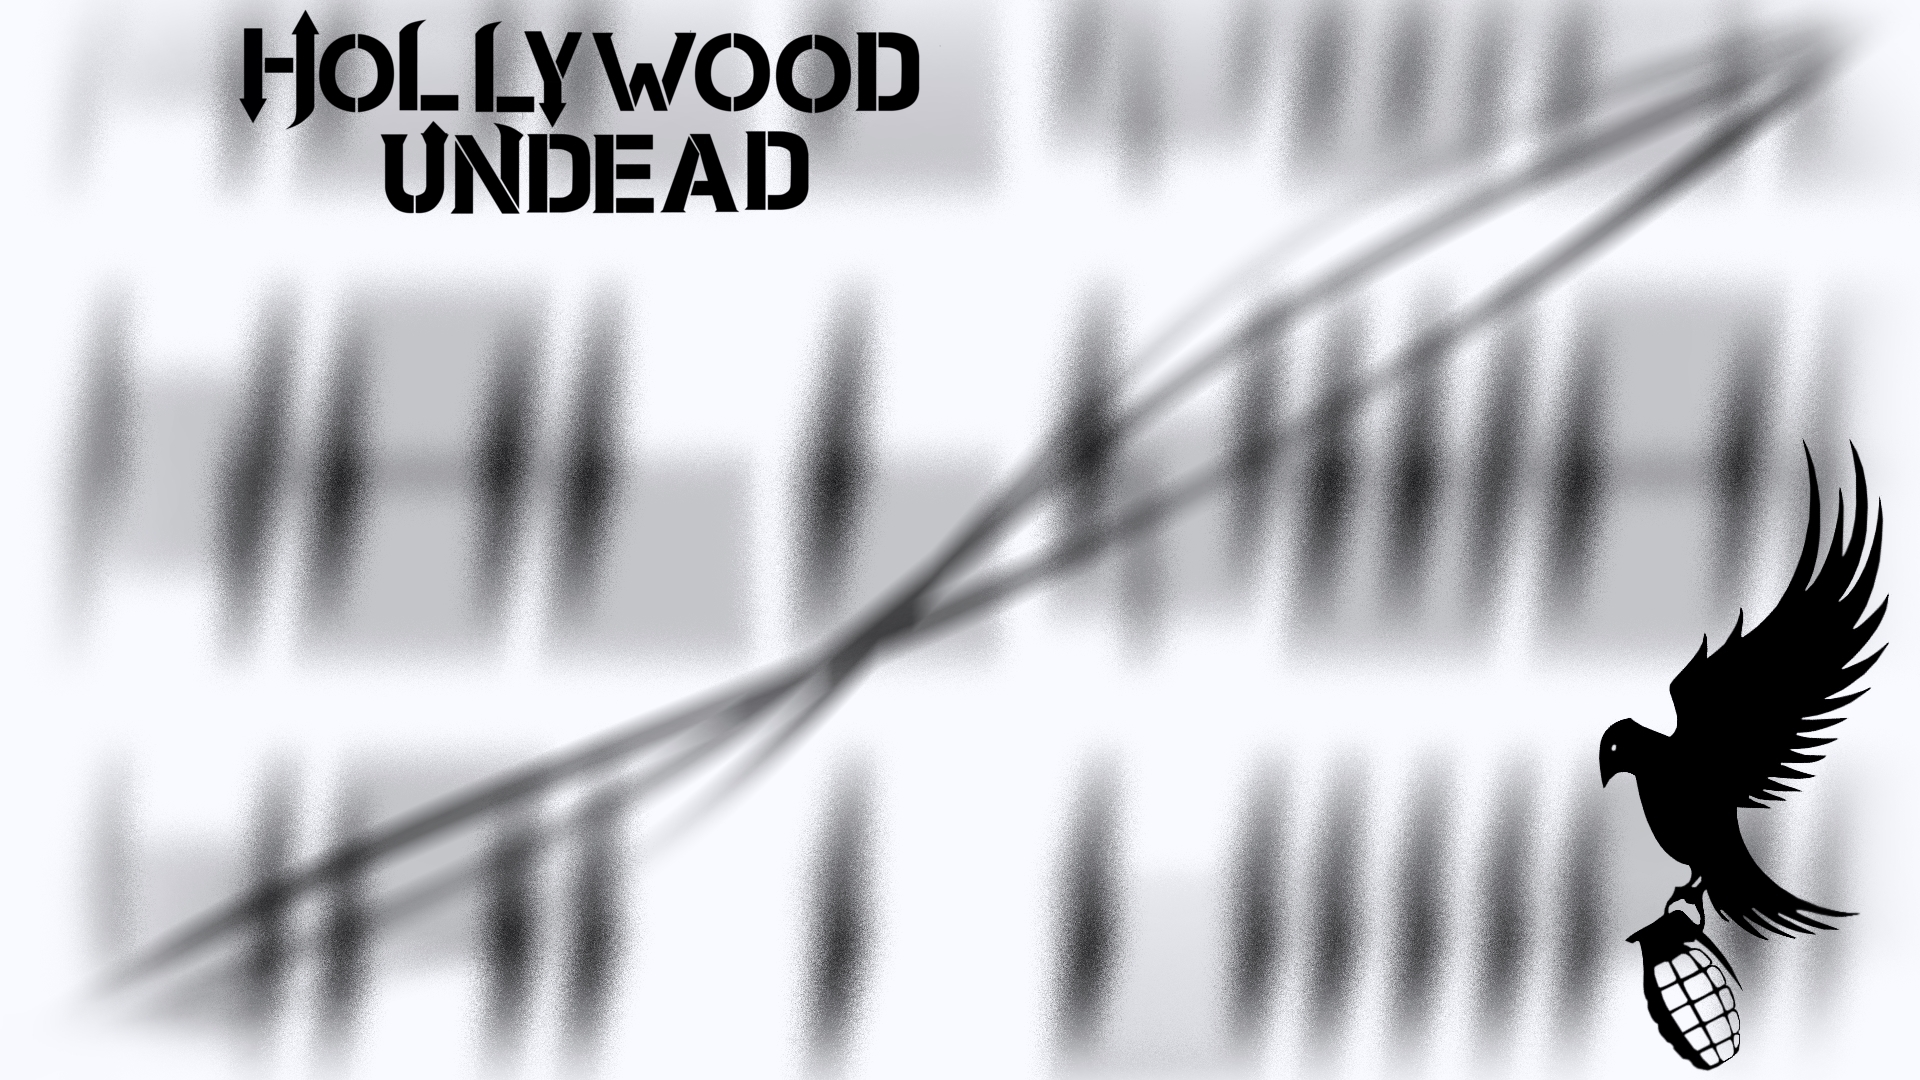 Hollywood Undead Hd Wallpaper - Holleywood Undead , HD Wallpaper & Backgrounds